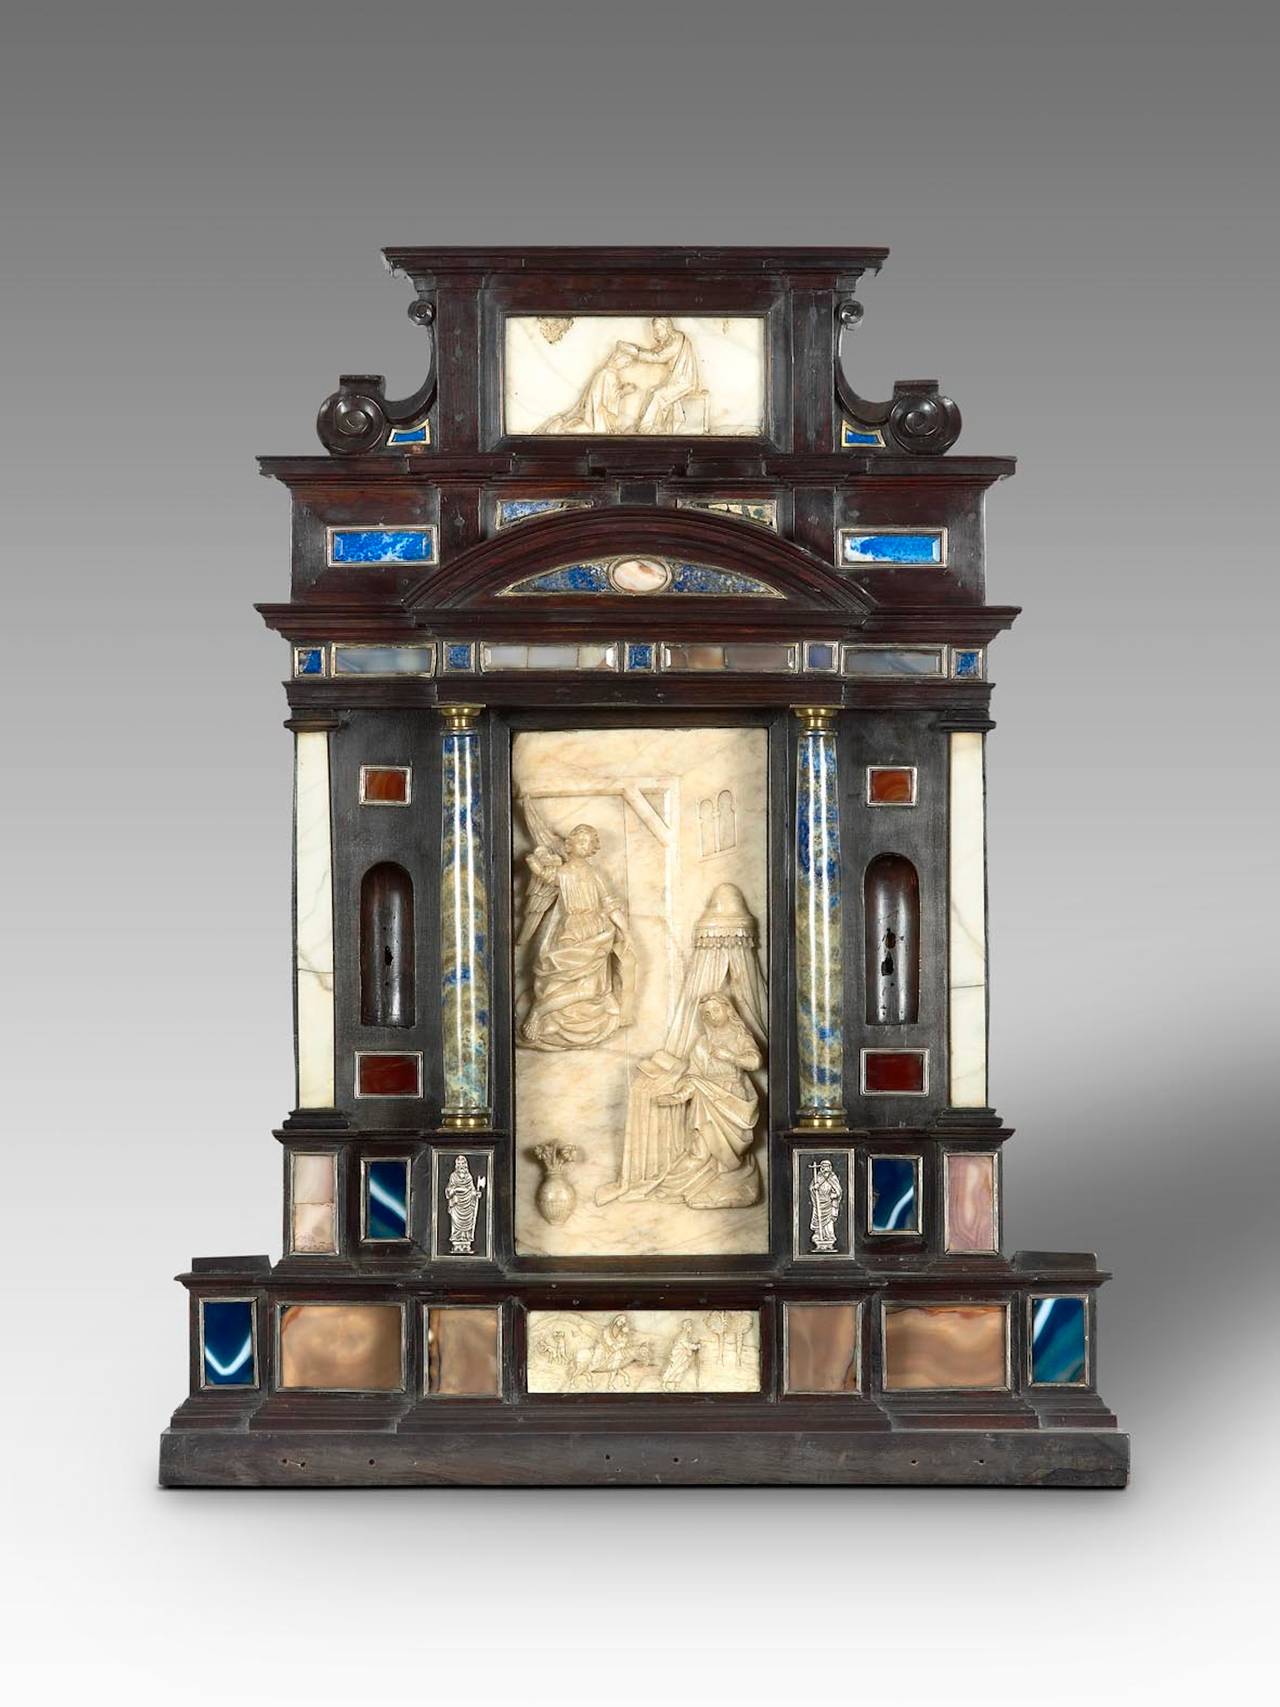 Beautiful portable altar.
Rome. Early 17th century.
Ebony wood, marble, alabaster, hard stones and silver.
73 cm. (high)x 56.5 (width) x 11.5 cm (deep).

Alabaster reliefs: 
- The principal scene represents The Annunciation (measures: 31,5 x